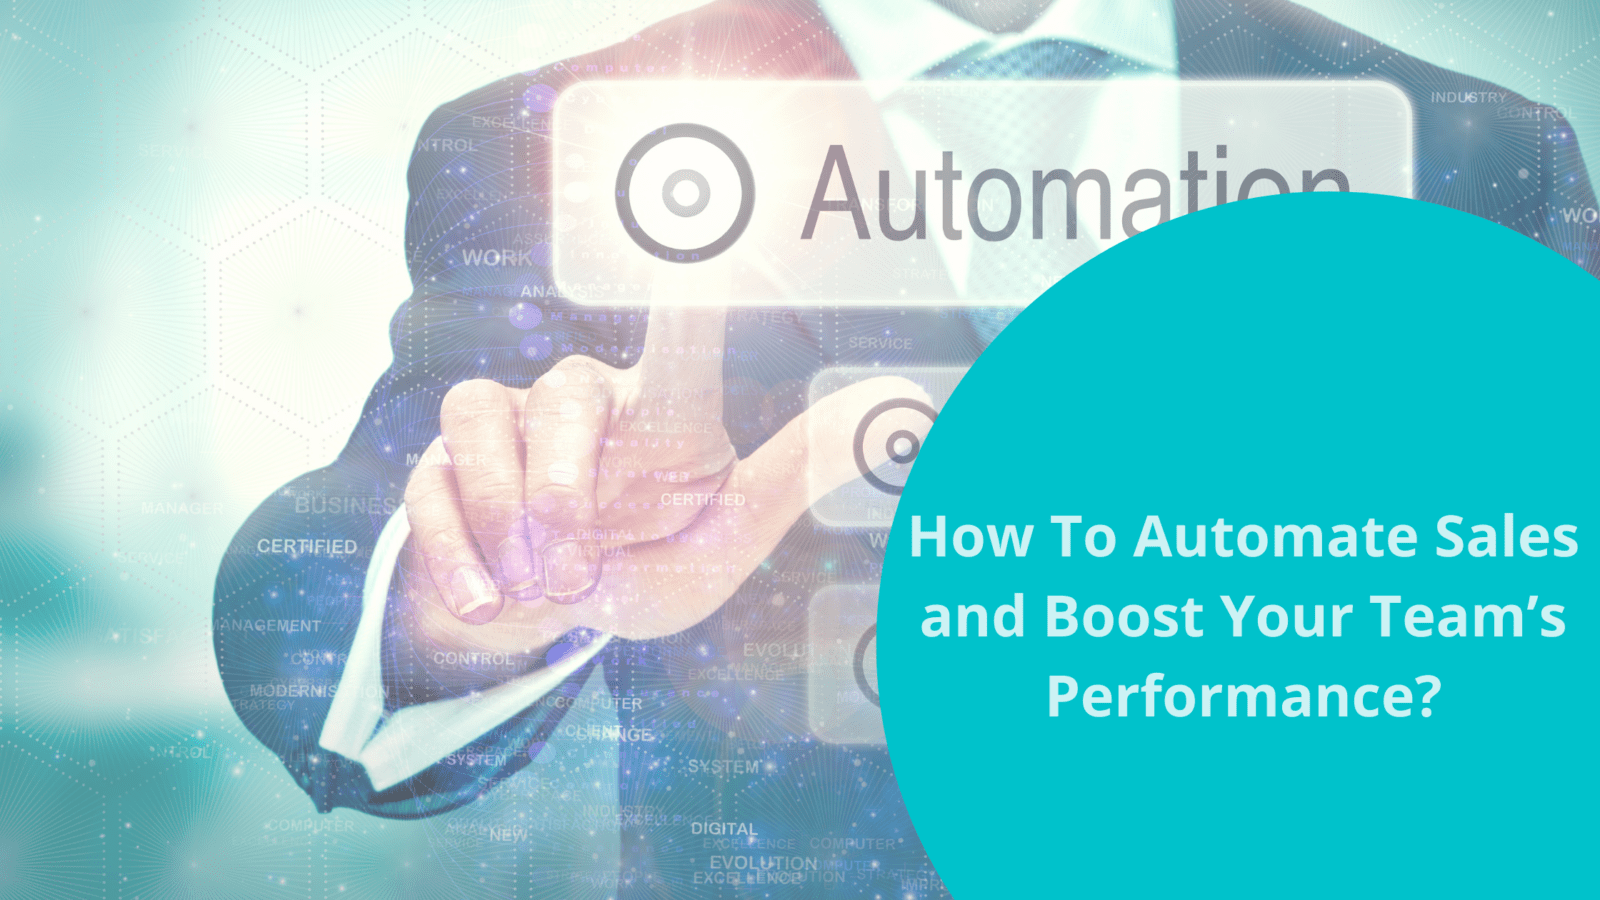 6 ways to automate sales and boost your team’s performance | bookafy